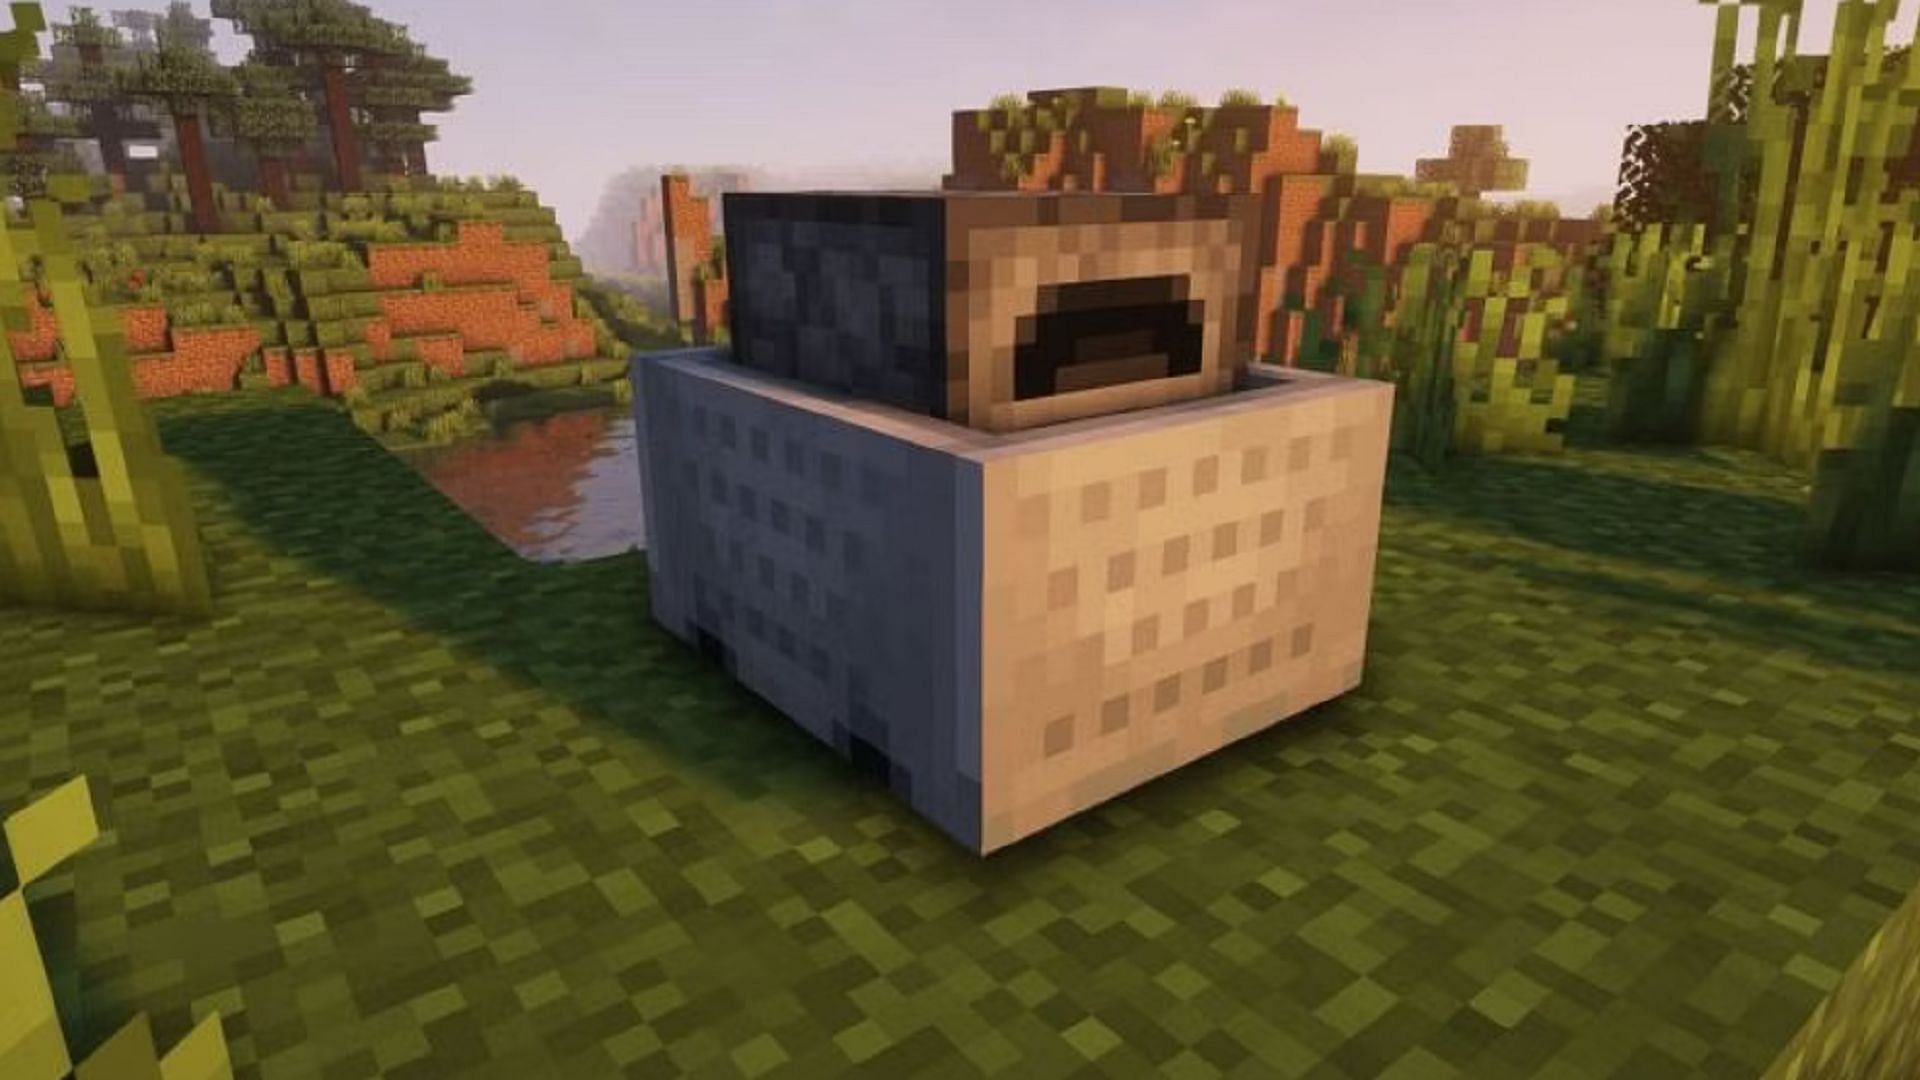 Furnace minecarts are often overlooked by Minecraft players (Image via Mojang)